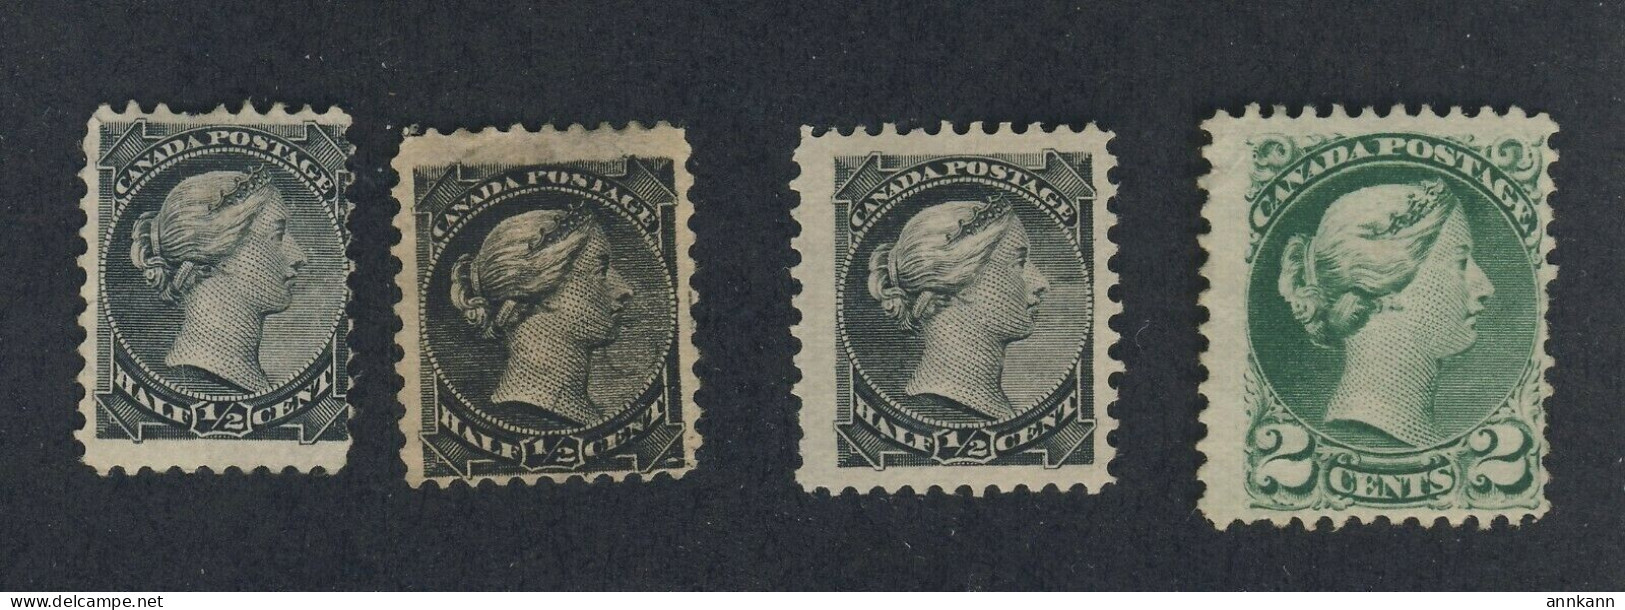 4x Canada Small Queen MNG Stamps 3x #34-1/2c F F/VF VF #36-2c Fine GV = $100.00 - Unused Stamps